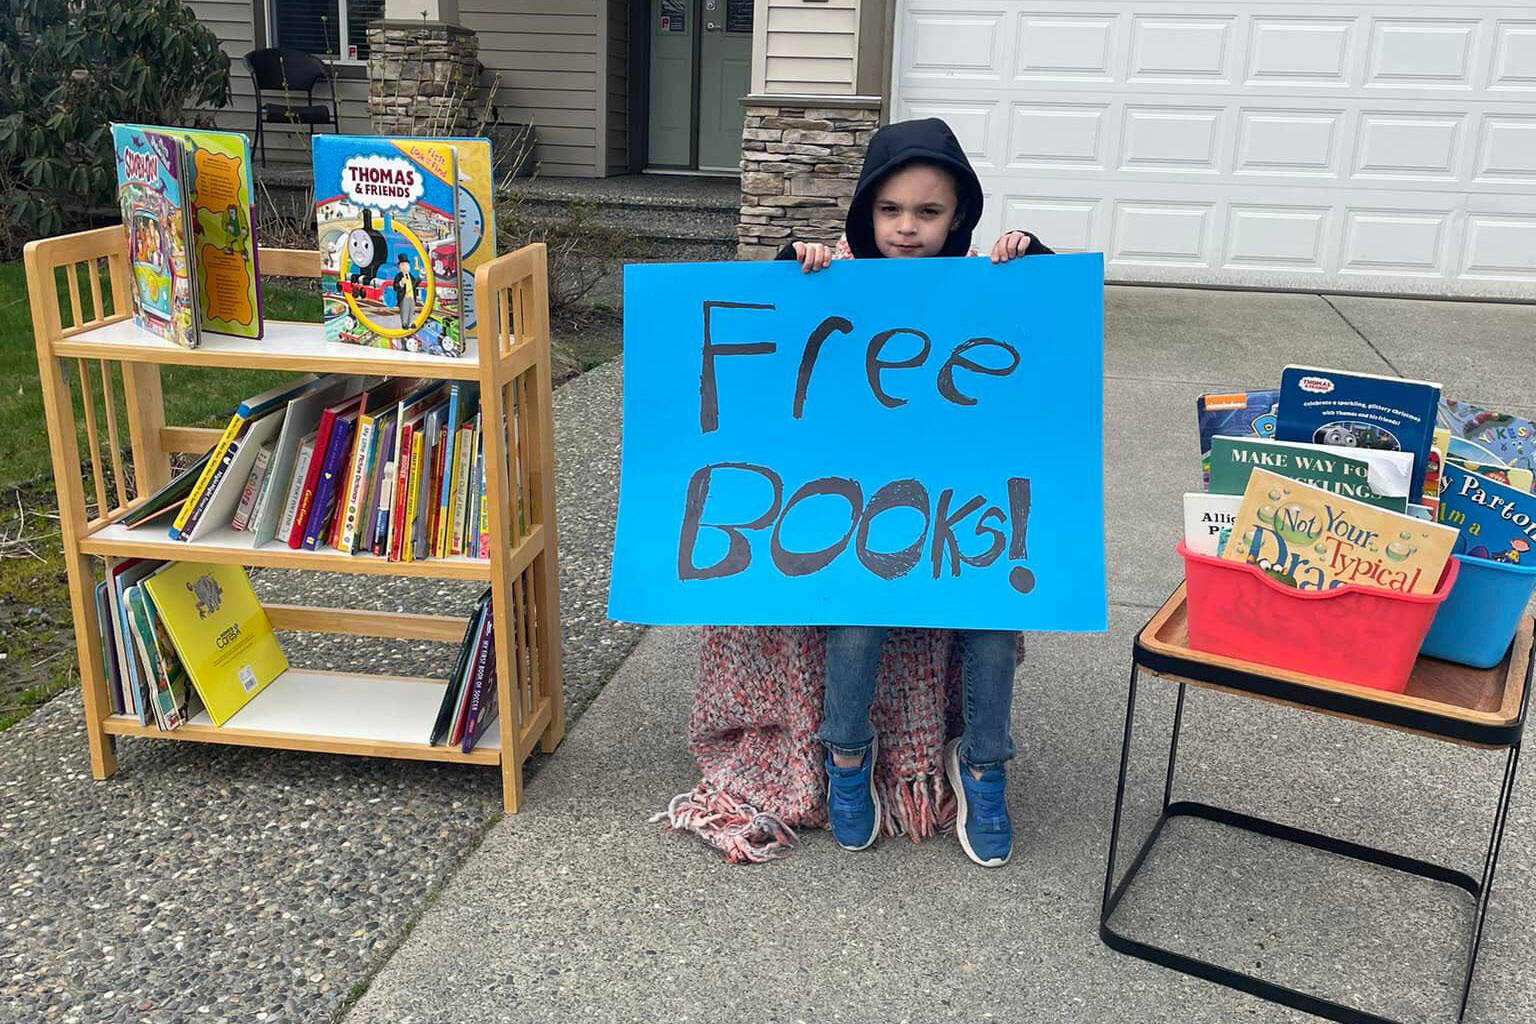 Jackson Kuhn, 7, of Chilliwack gave away a bunch of his books to other kids on Friday, March 25, 2022. (Jenn Kuhn photo)